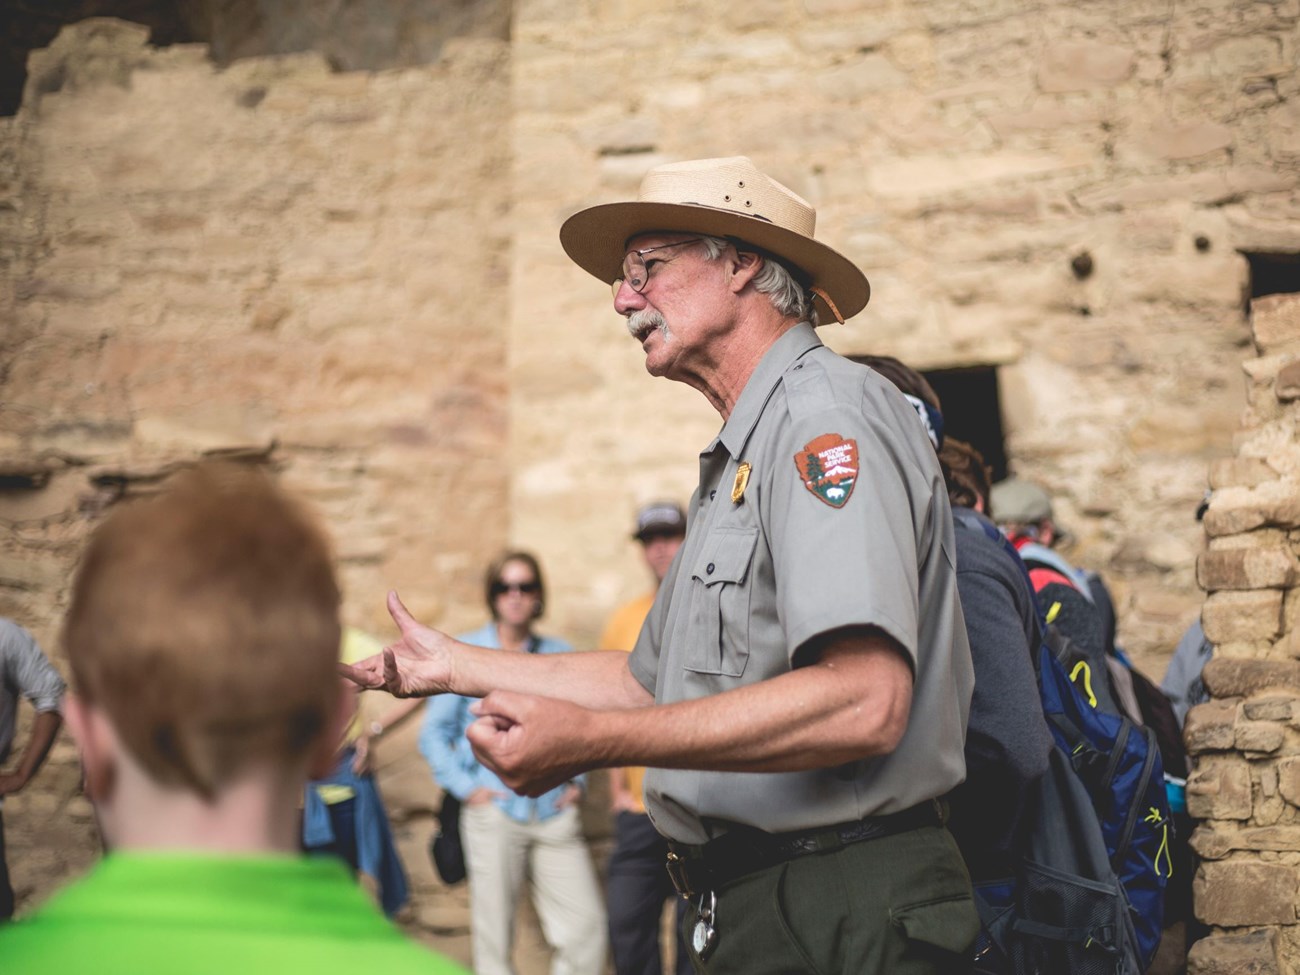 A ranger with white hair and mustache gestures with hands while visitors gather around listening